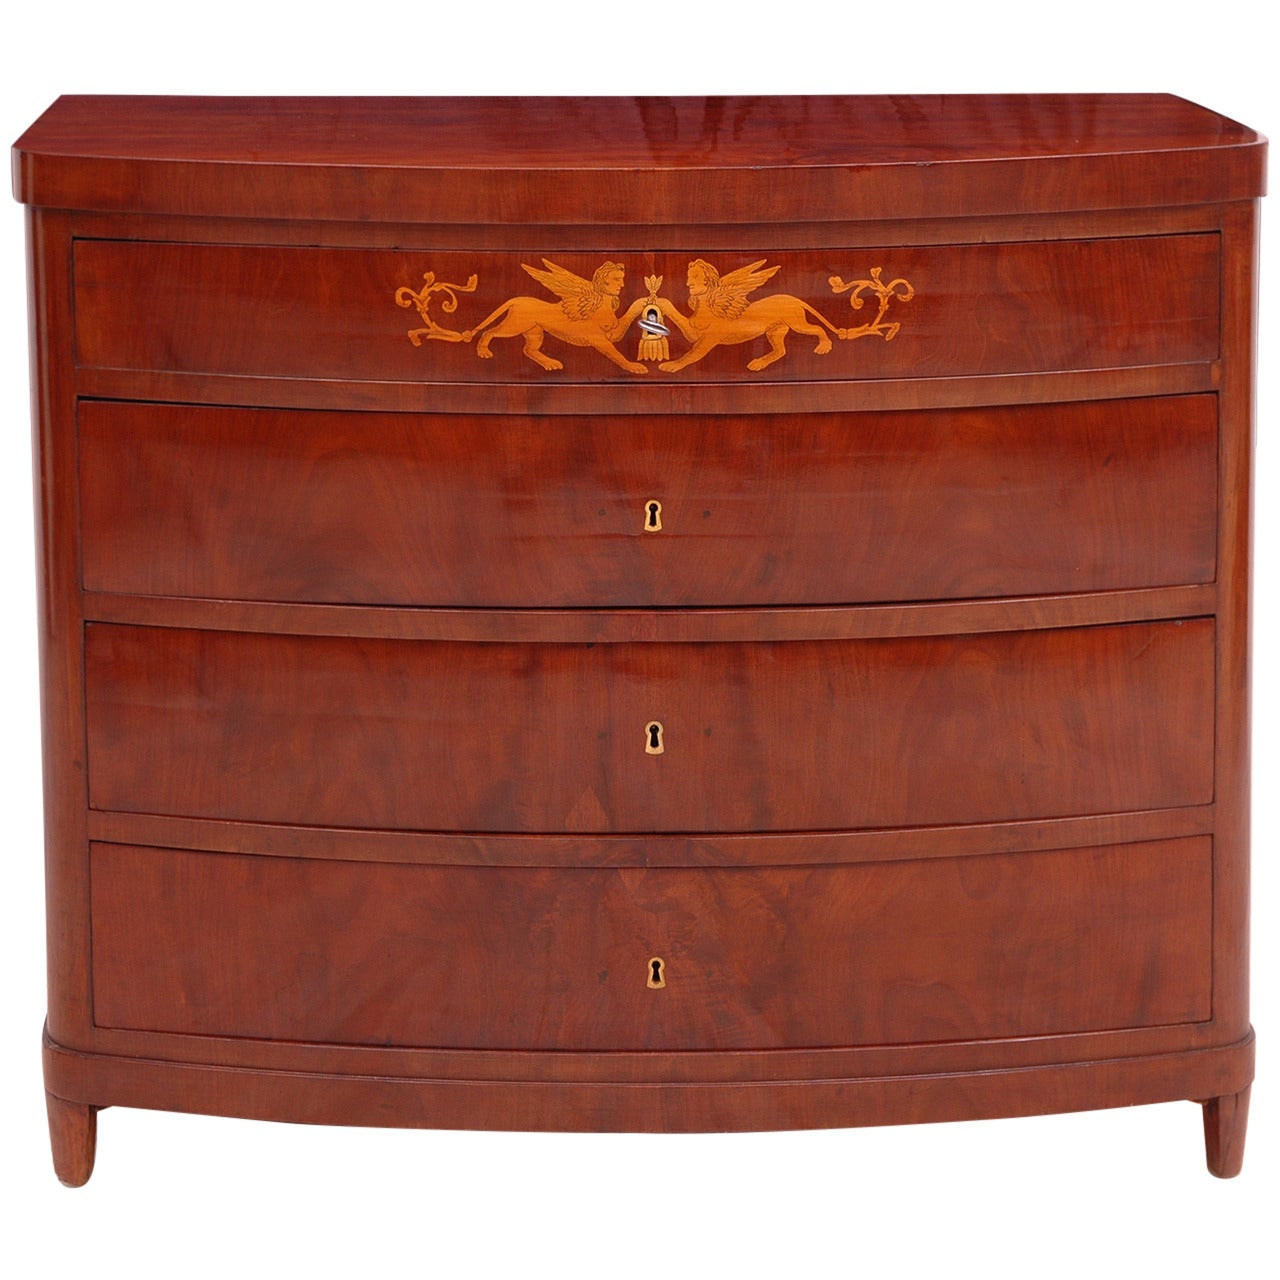 Antique Empire Chest of Drawers in Cuban Mahogany with Interior Writing Surface